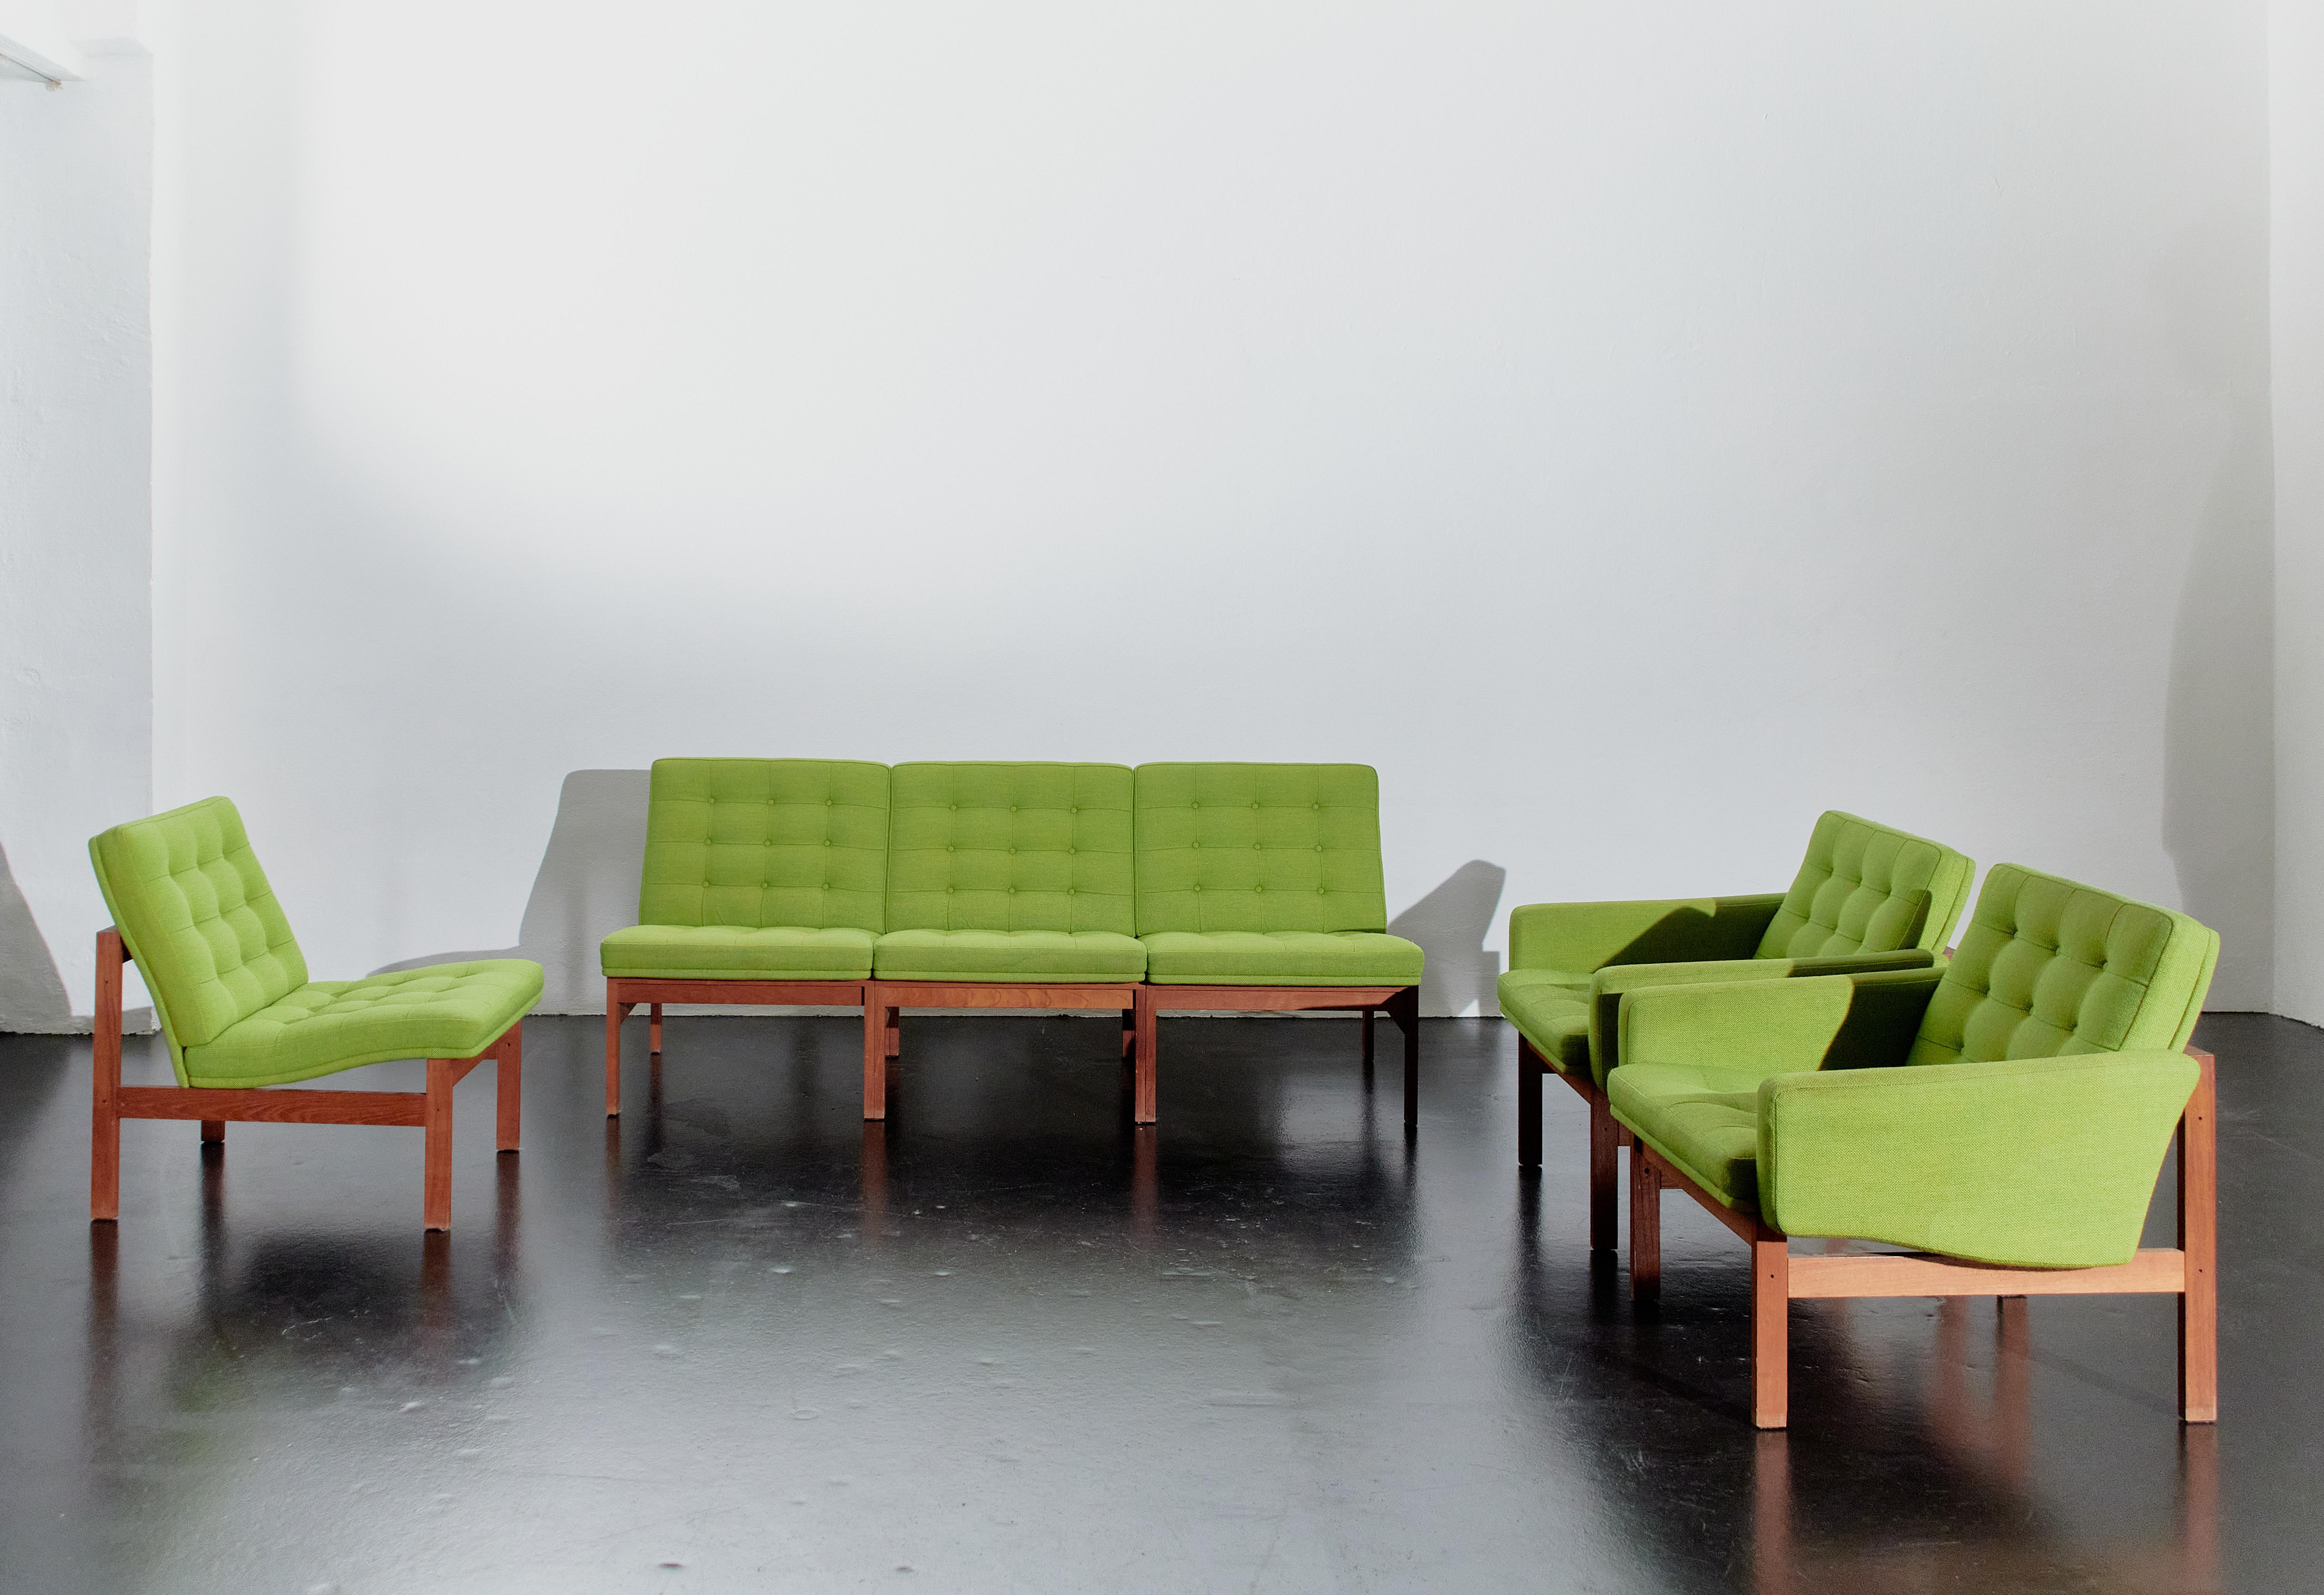 Moduline sofa set designed by Ole Gjerlov Knudsen & Torben Lind, manufactured by Cado, Denmark 1962. 
Scandinavian mid-century-modern.

This modular set contains four chairs and two armchairs.

The sofa has a solid teak wood frame and original green